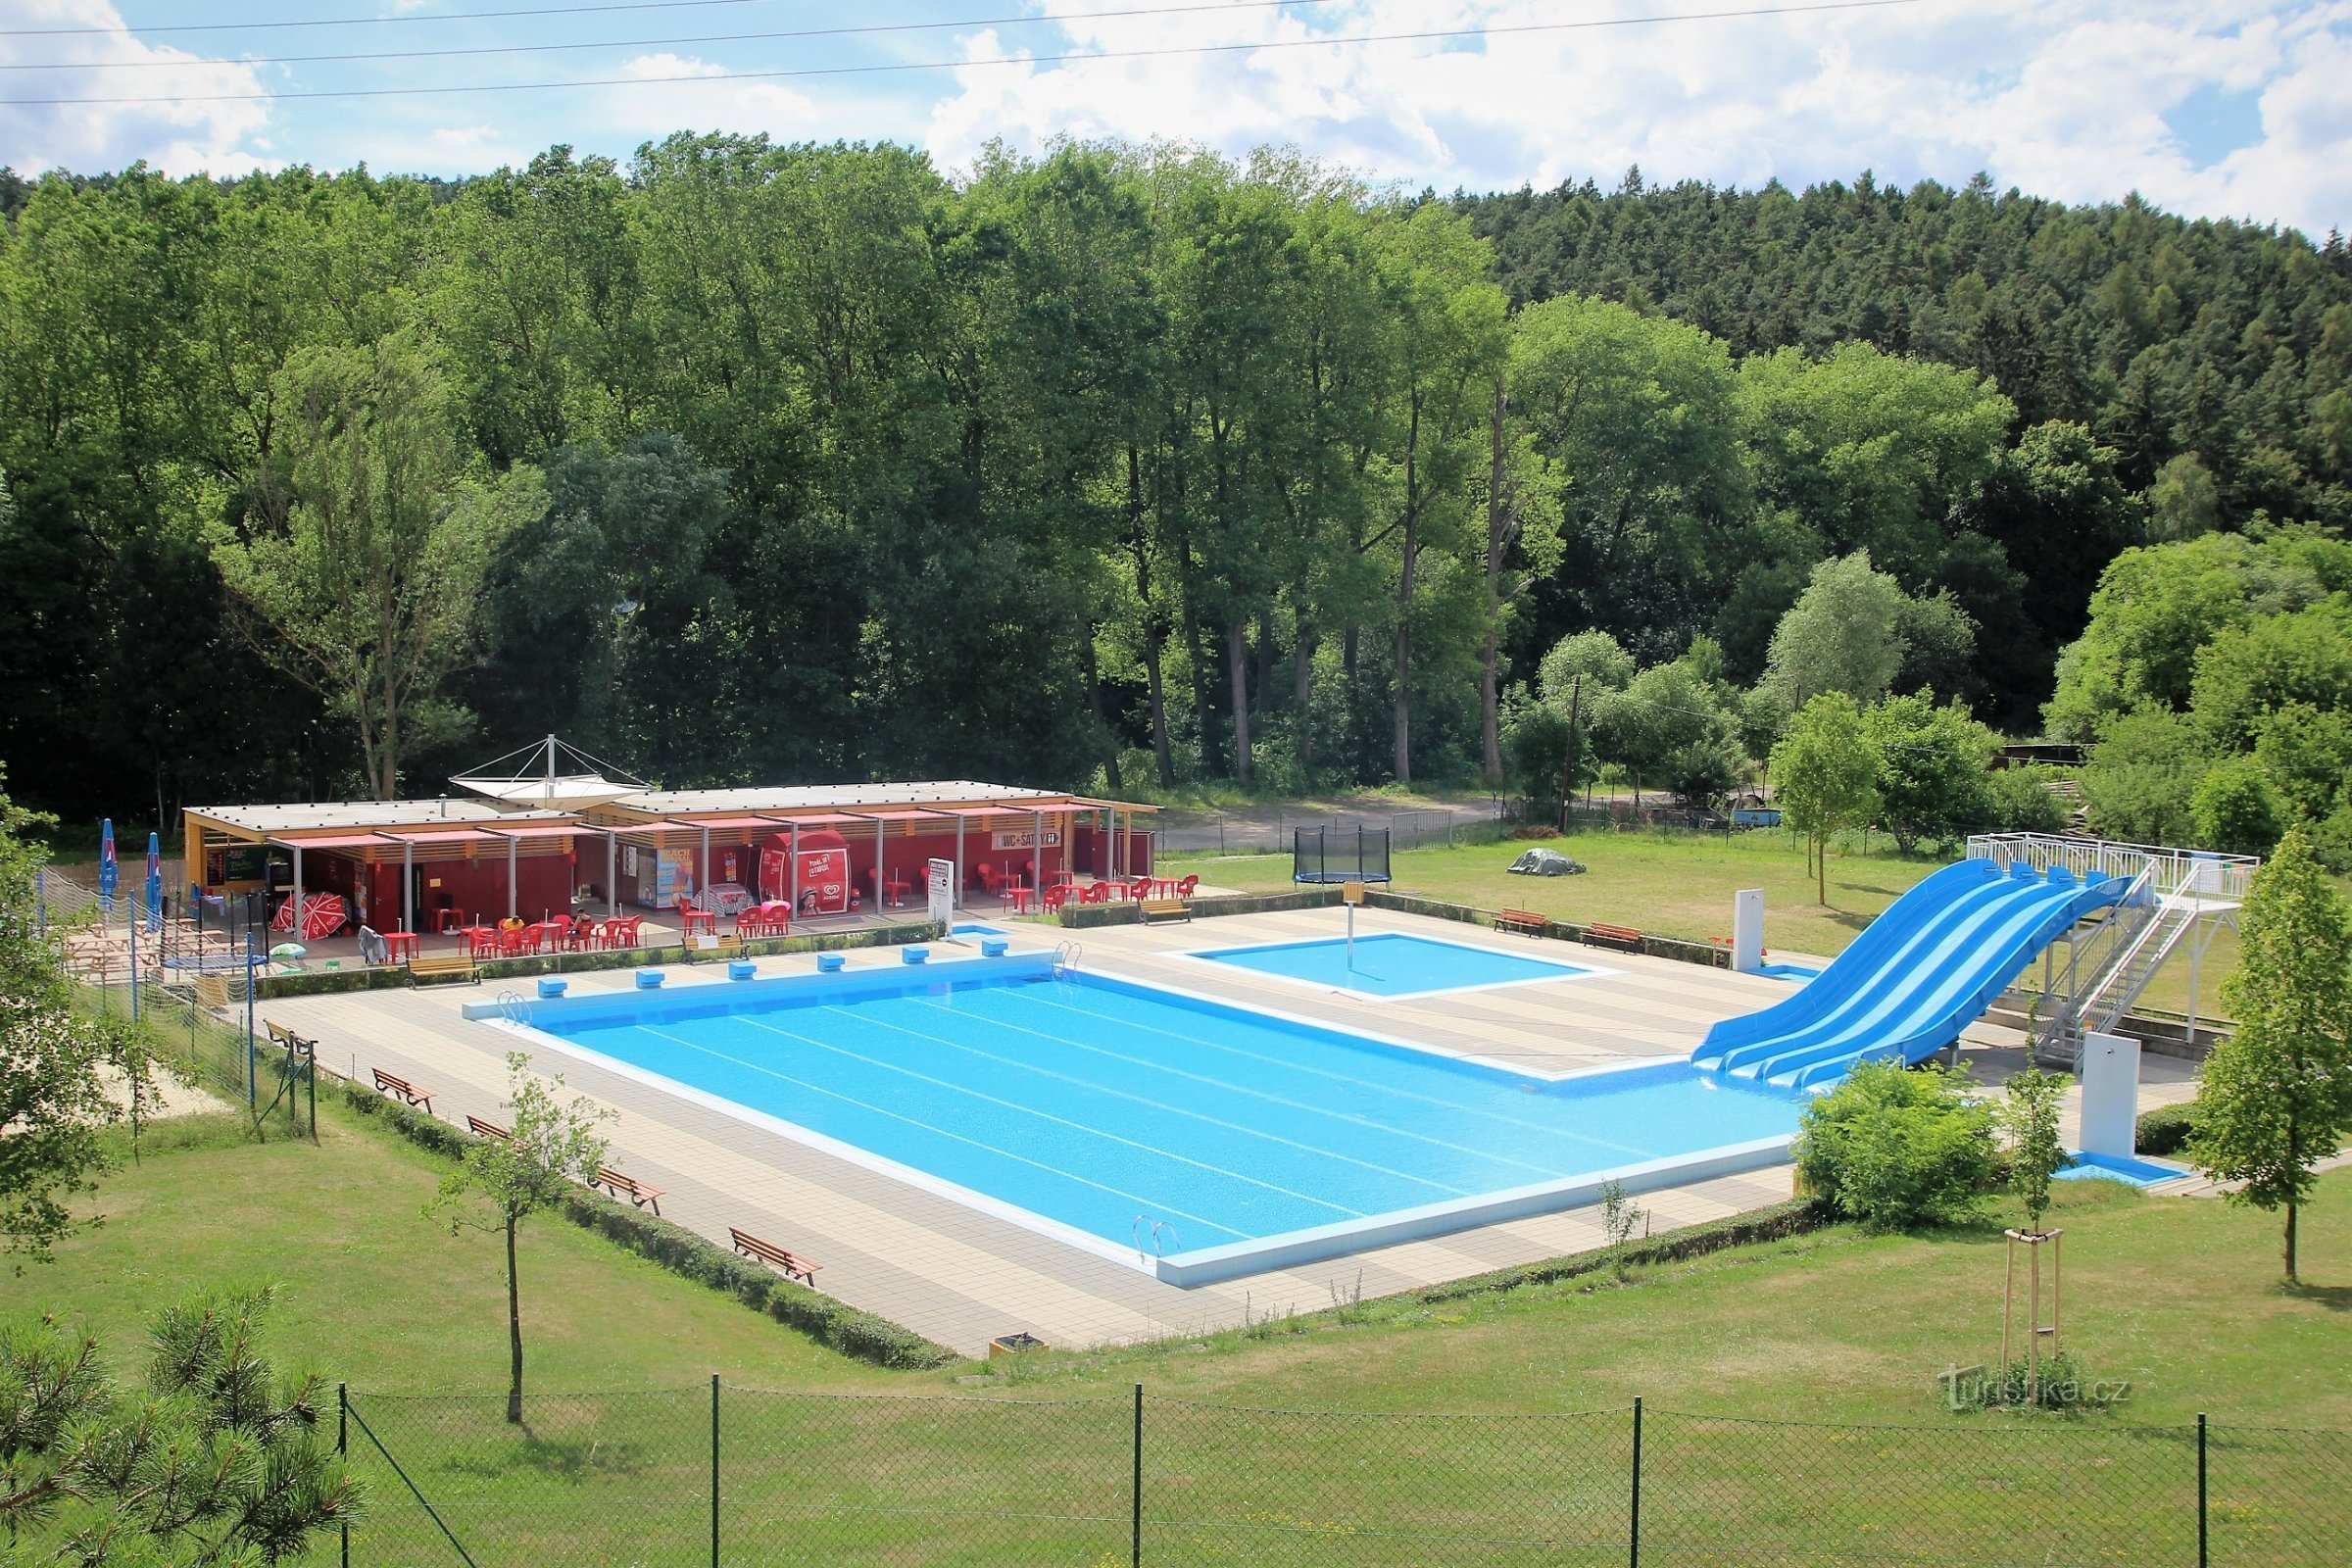 General view of the swimming pool area